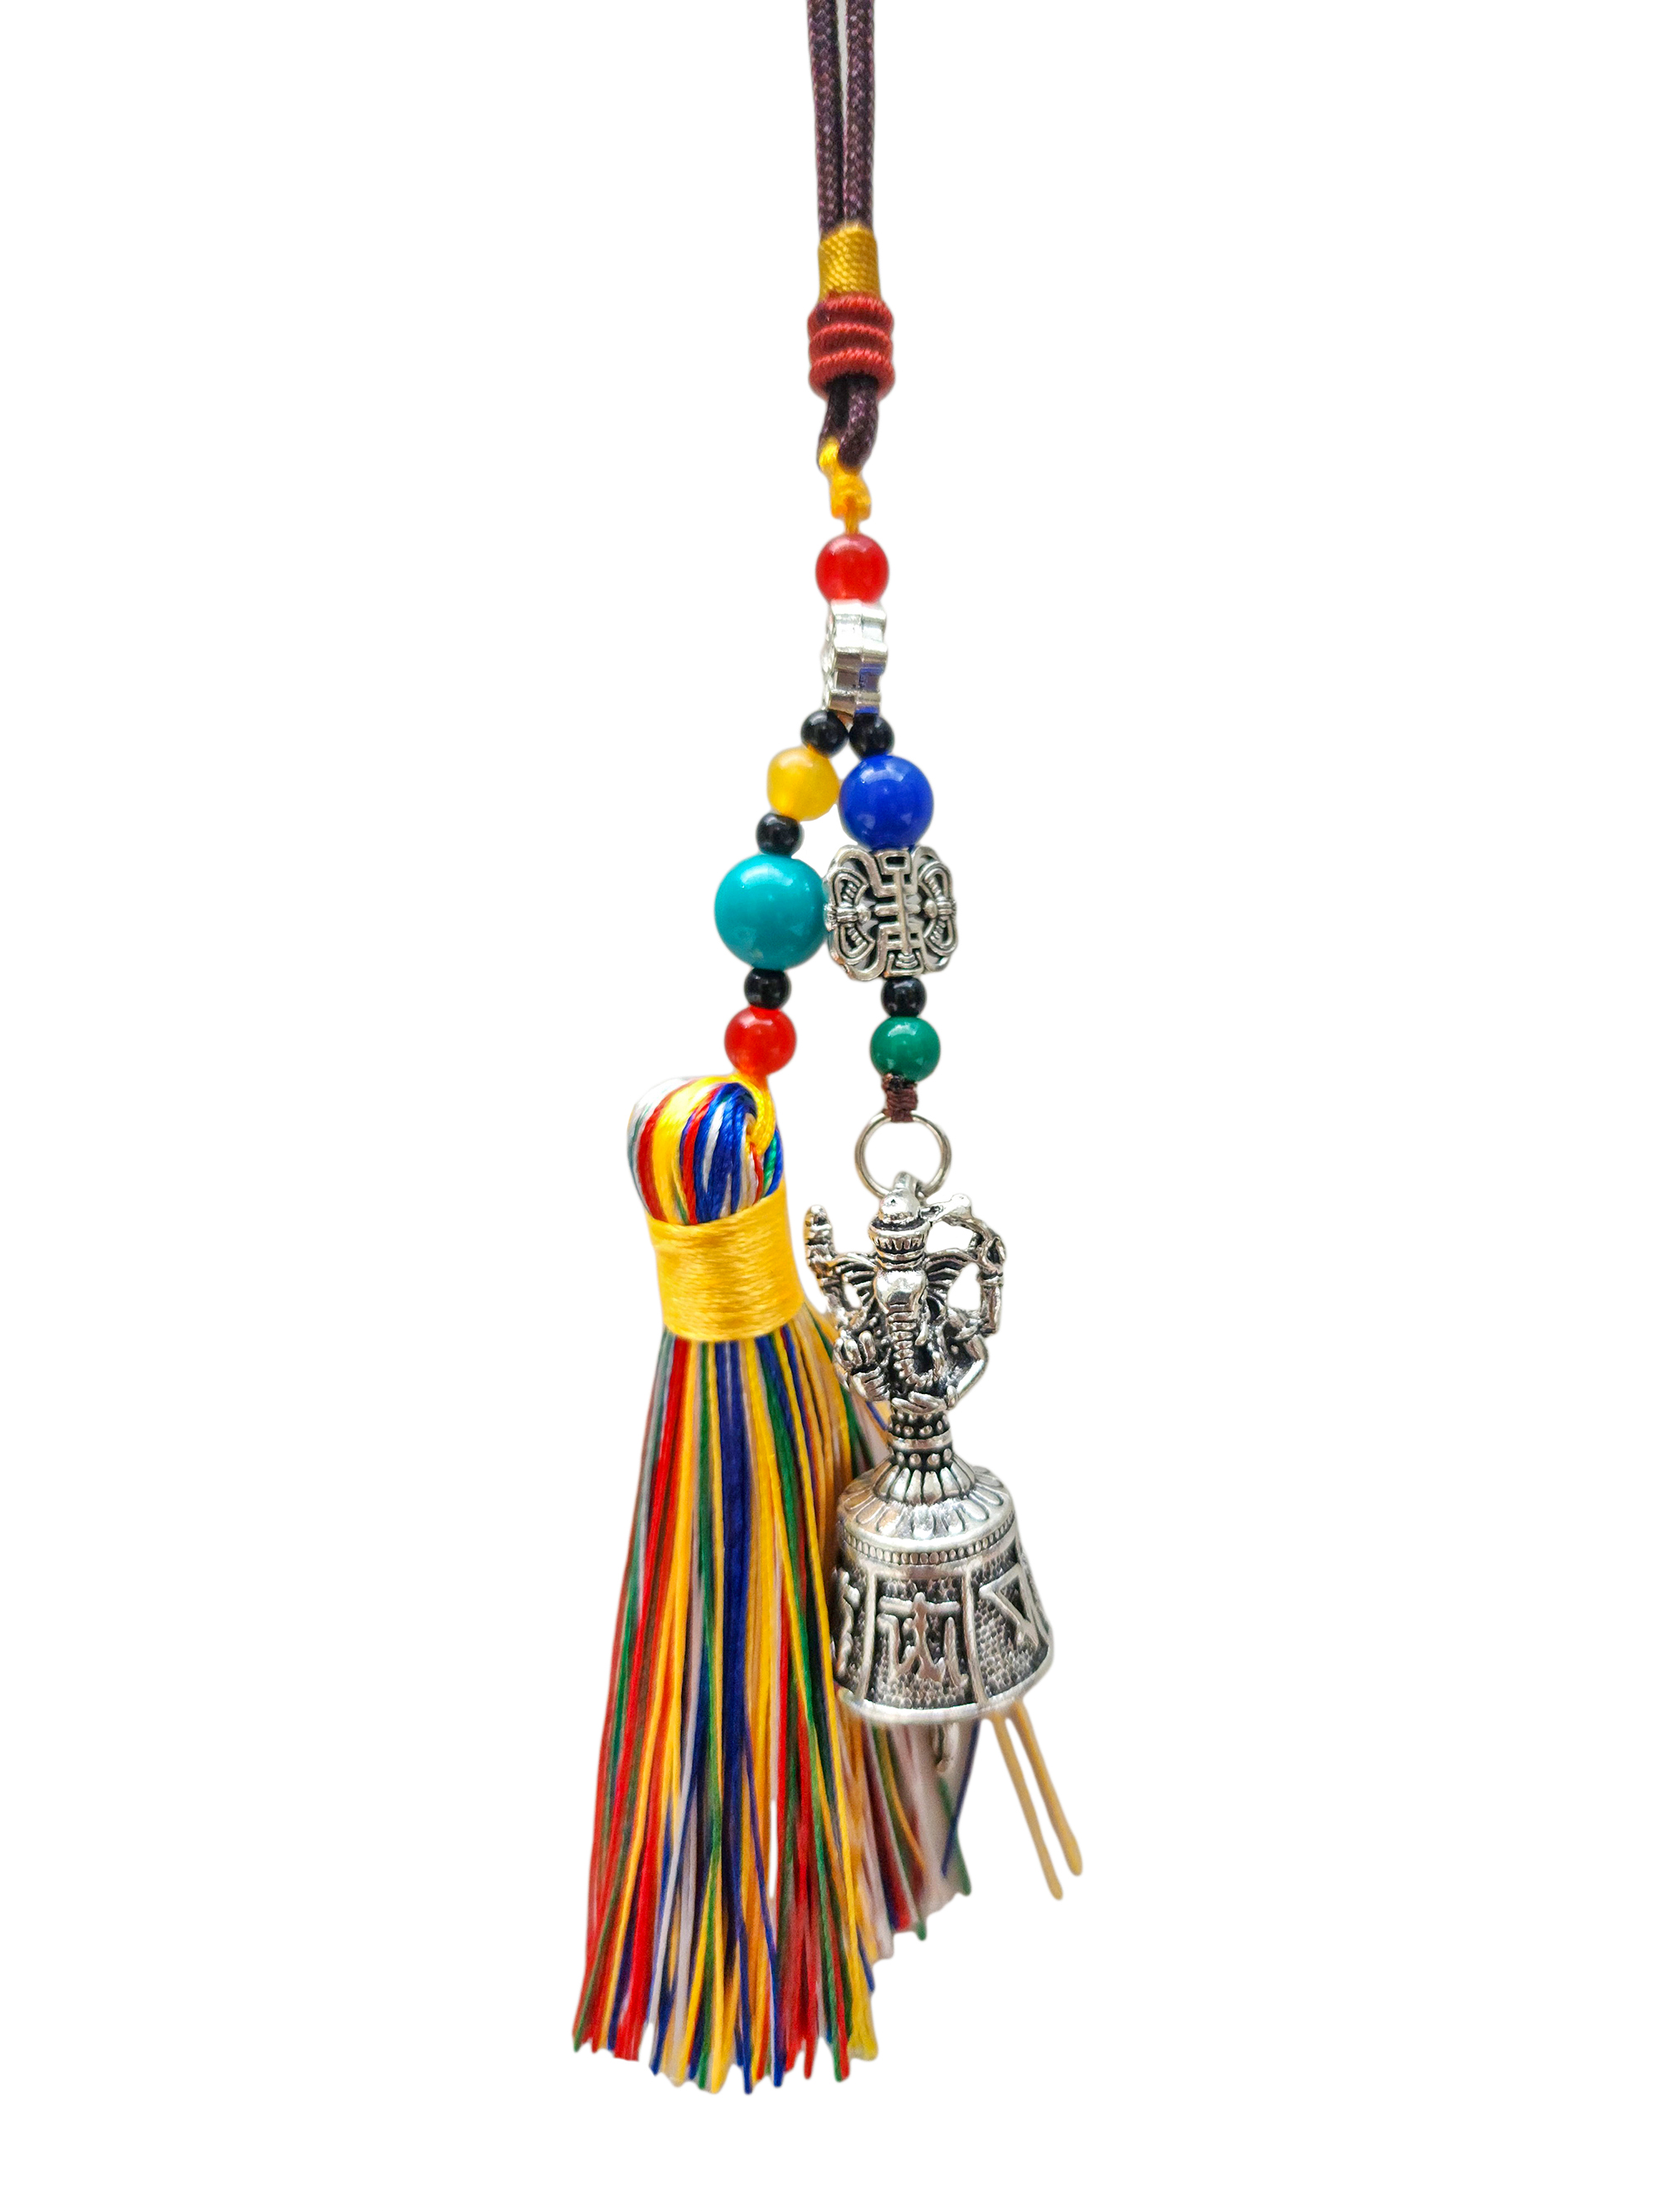 Buddhist Ritual Amulet Hanging With Ganesh Design Bell, For Wall, Altar, Bags And Keyring